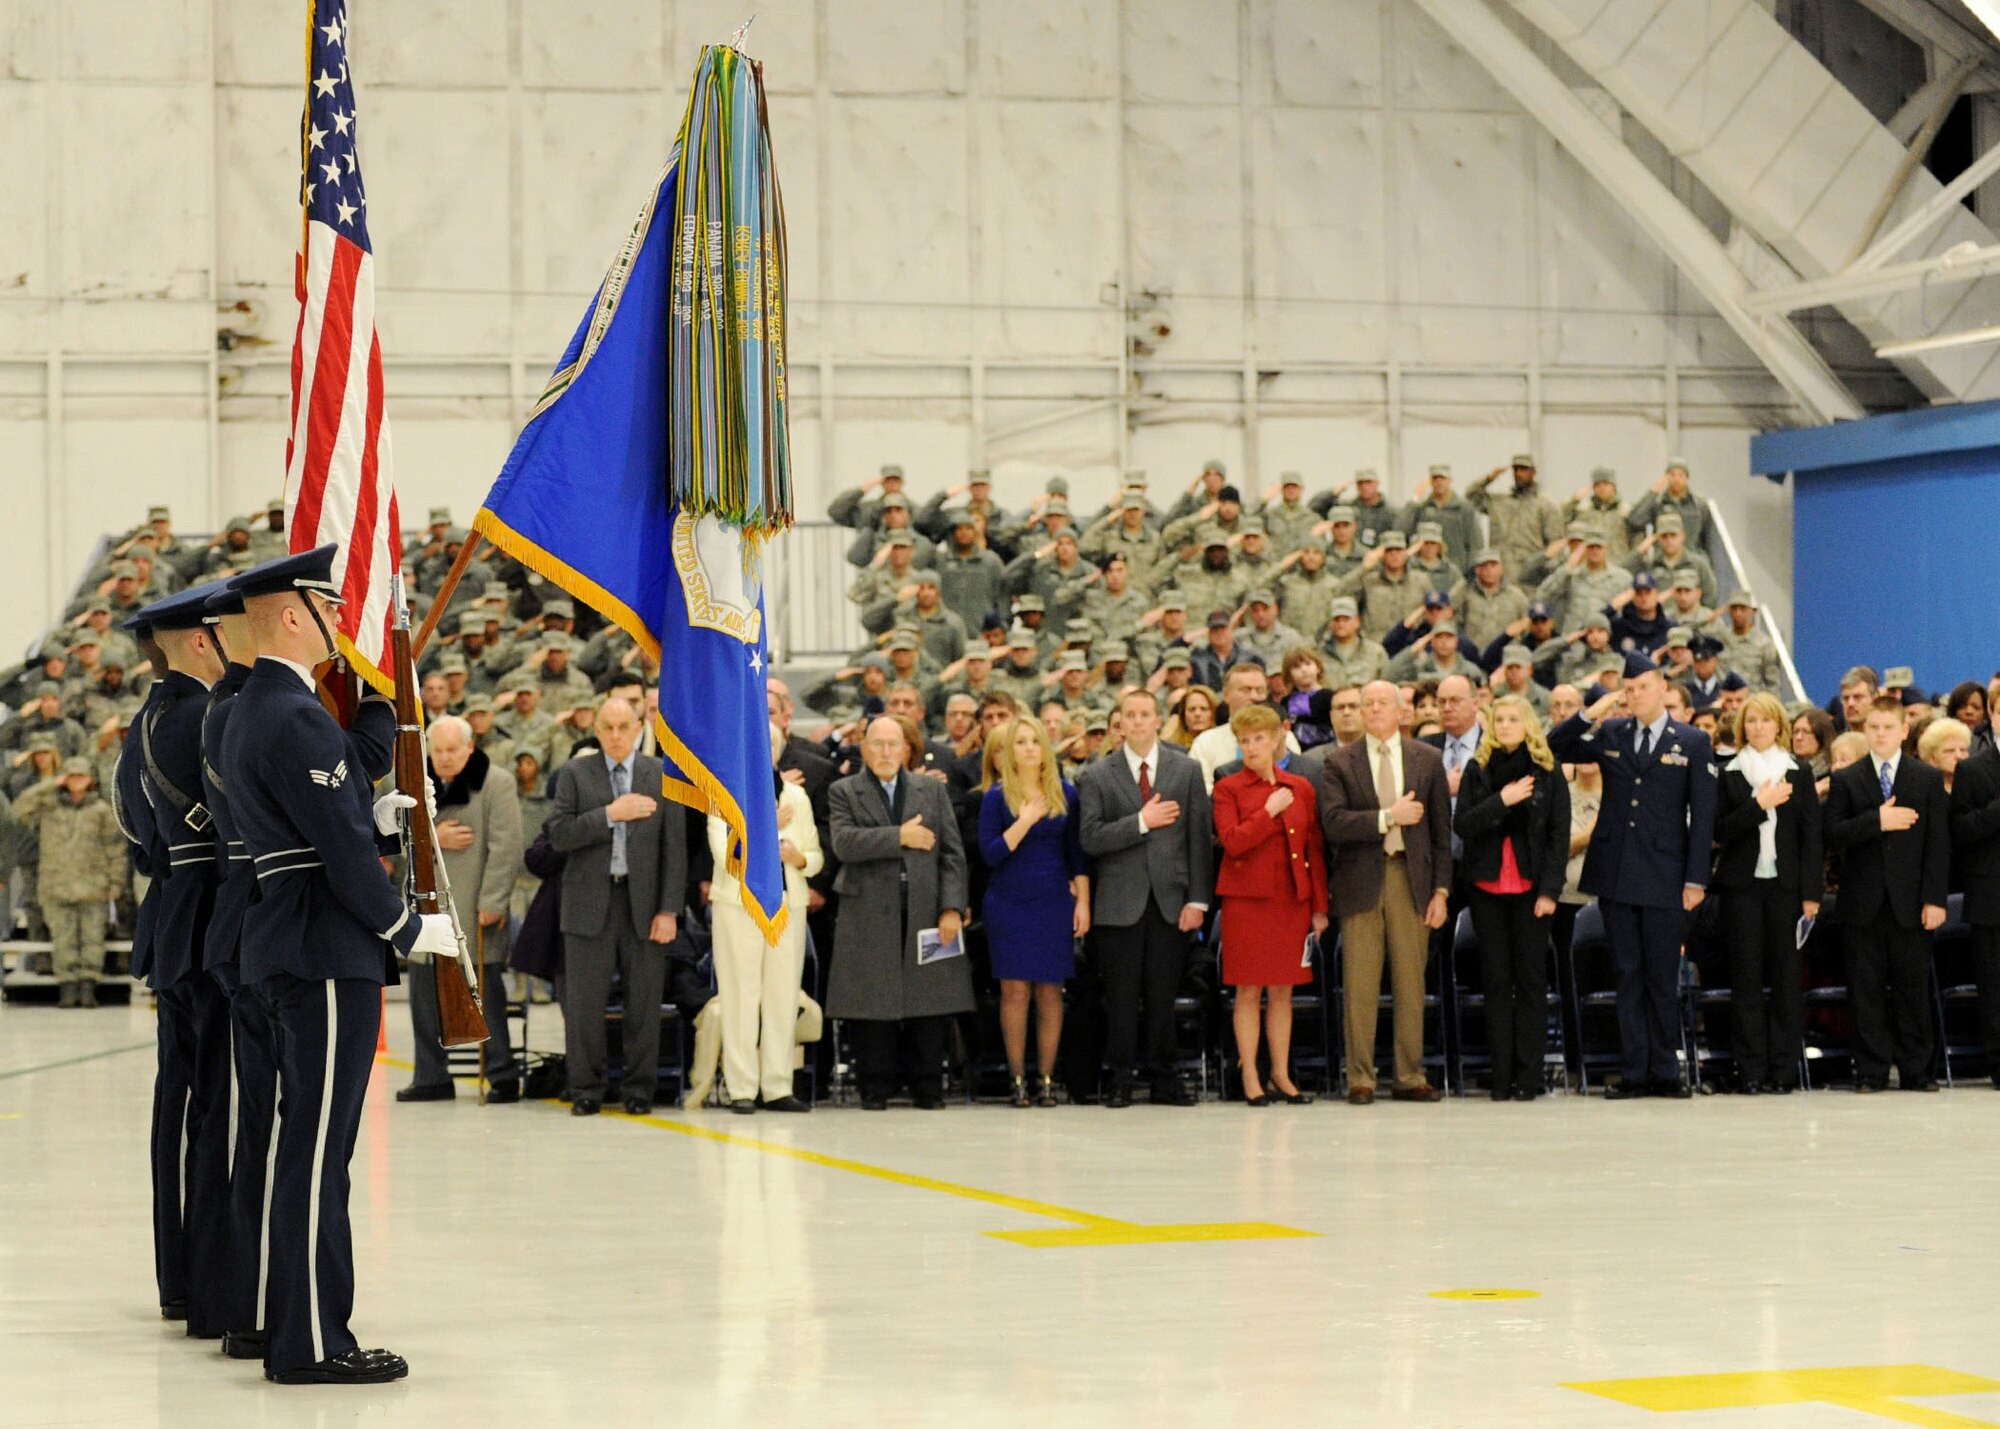 The United States Air Force Honor Guard Present the Colors during the Chief Master Sergeant of the Air Force Transition Ceremony at Joint Base Andrews, Md., Jan. 24, 2013. Chief Master Sgt. James A. Cody became the 17th CMSAF following the retirement of CMSAF James A. Roy. Roy's retirement culminated more than 30 years of service. (U.S. Air Force photo/ Staff Sgt. Nichelle Anderson)